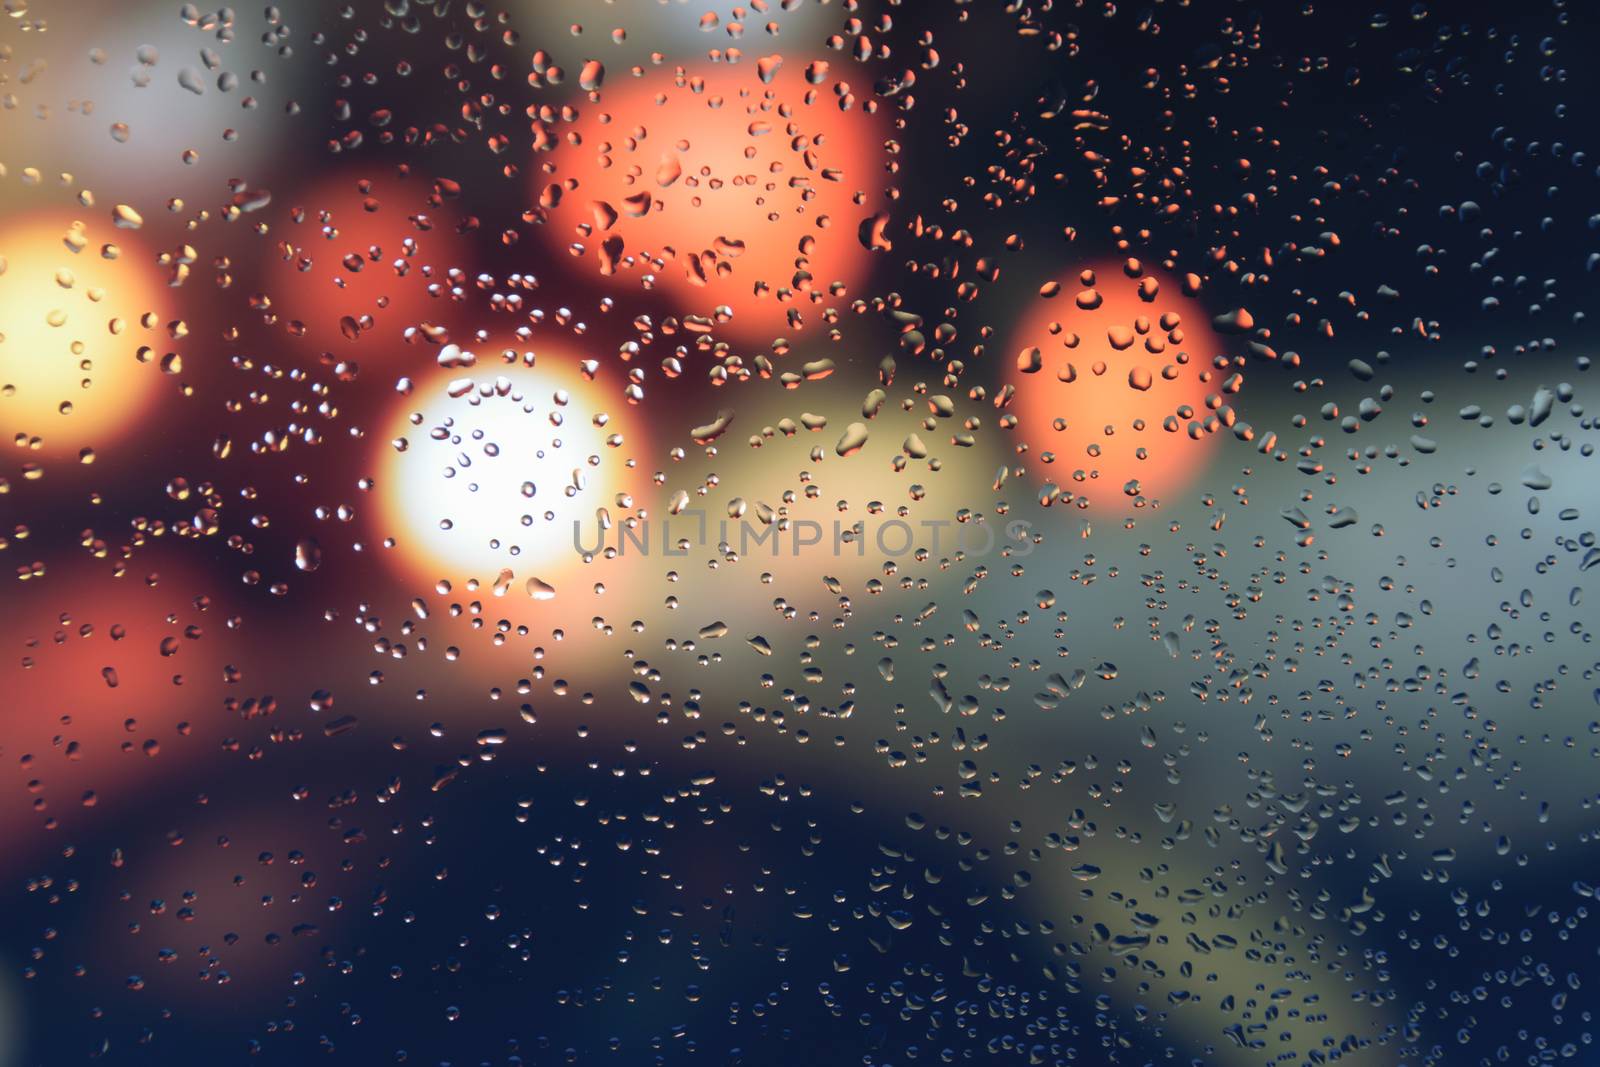 Raindrops on a car window with beautifully blurred background of street traffic lights